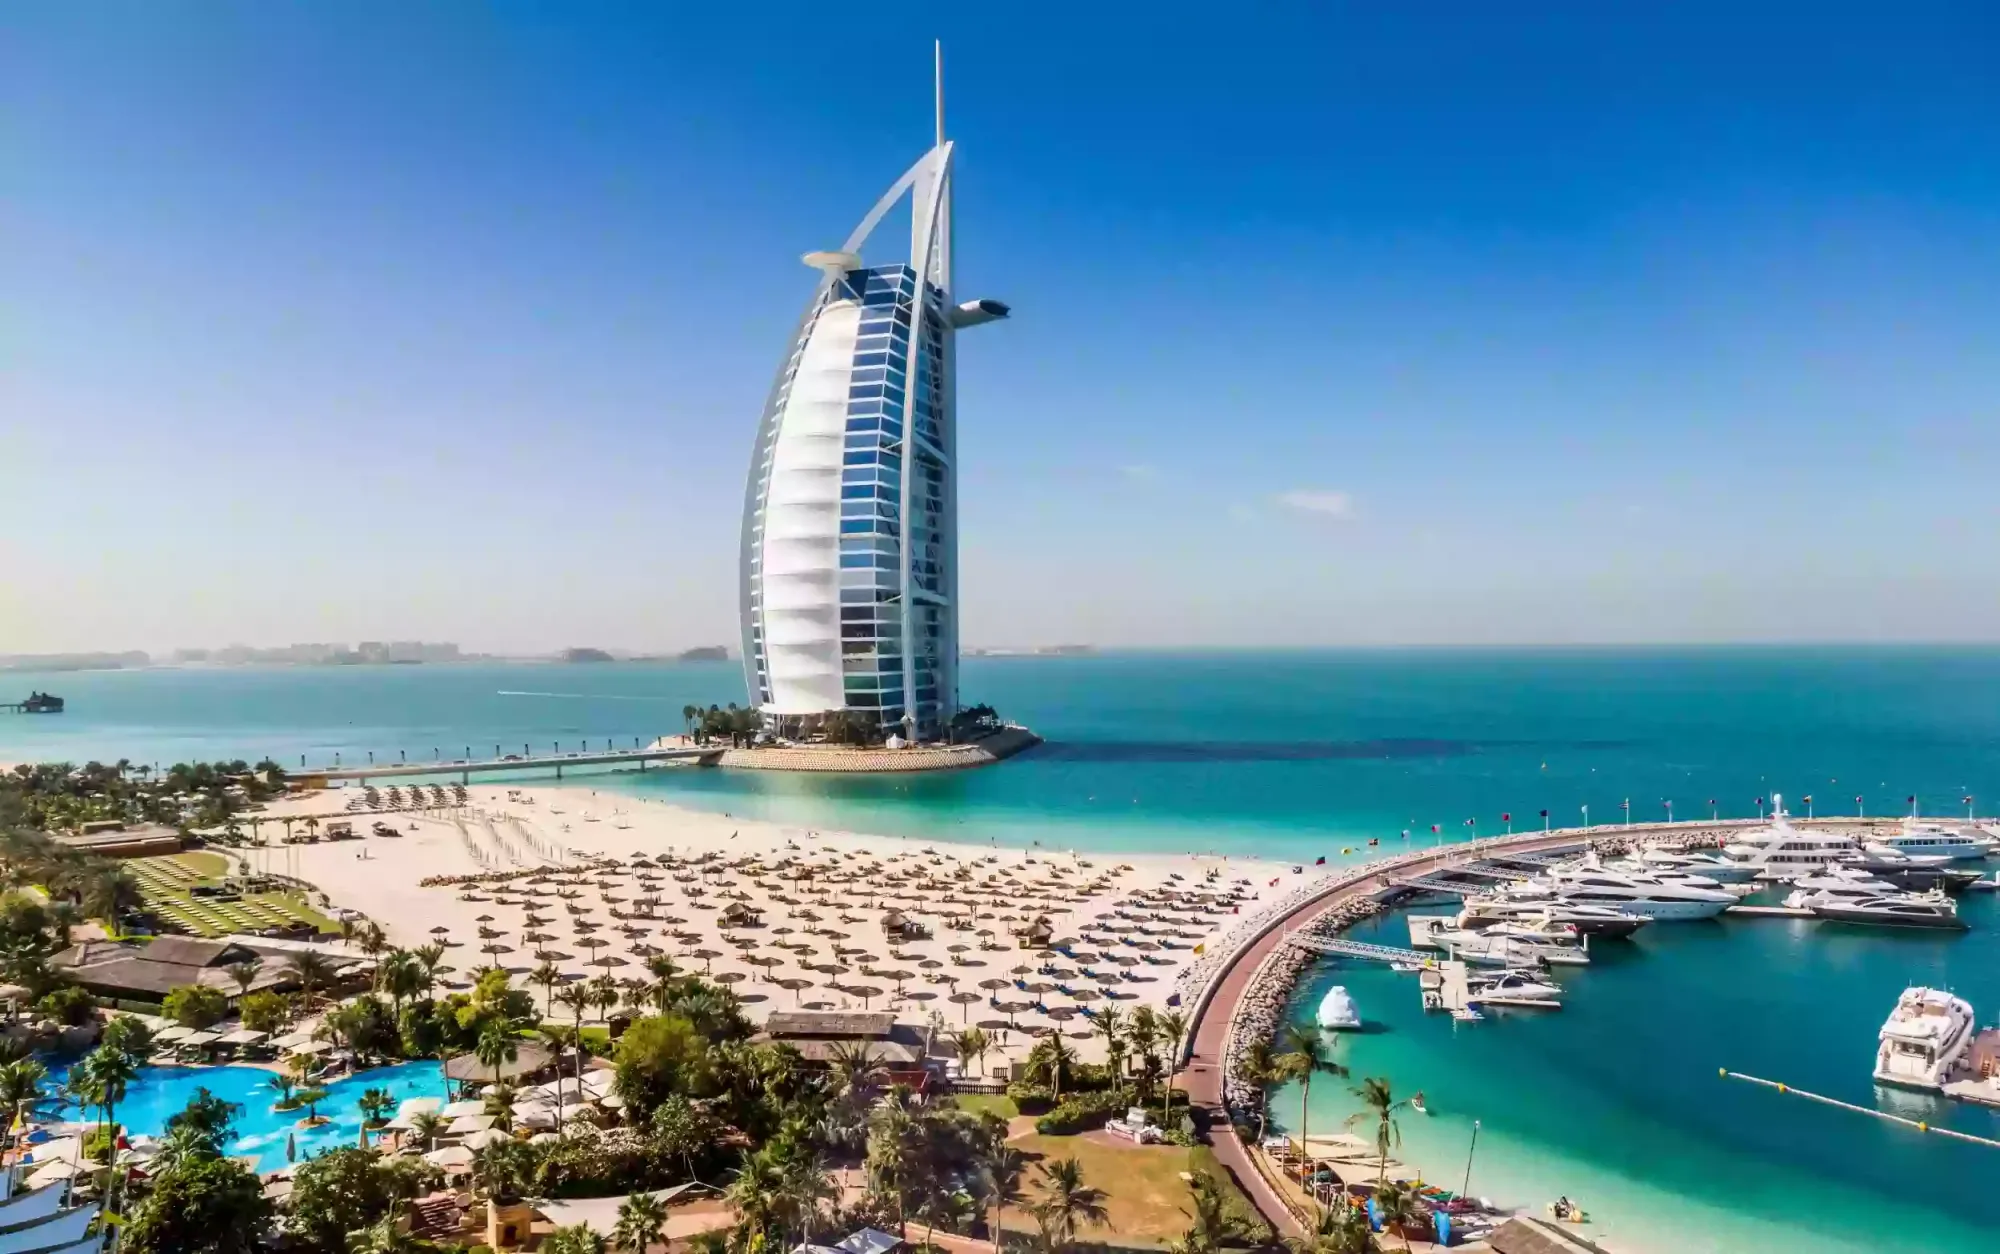 7 Incredible Facts About Dubai That You Probably Didn't Know